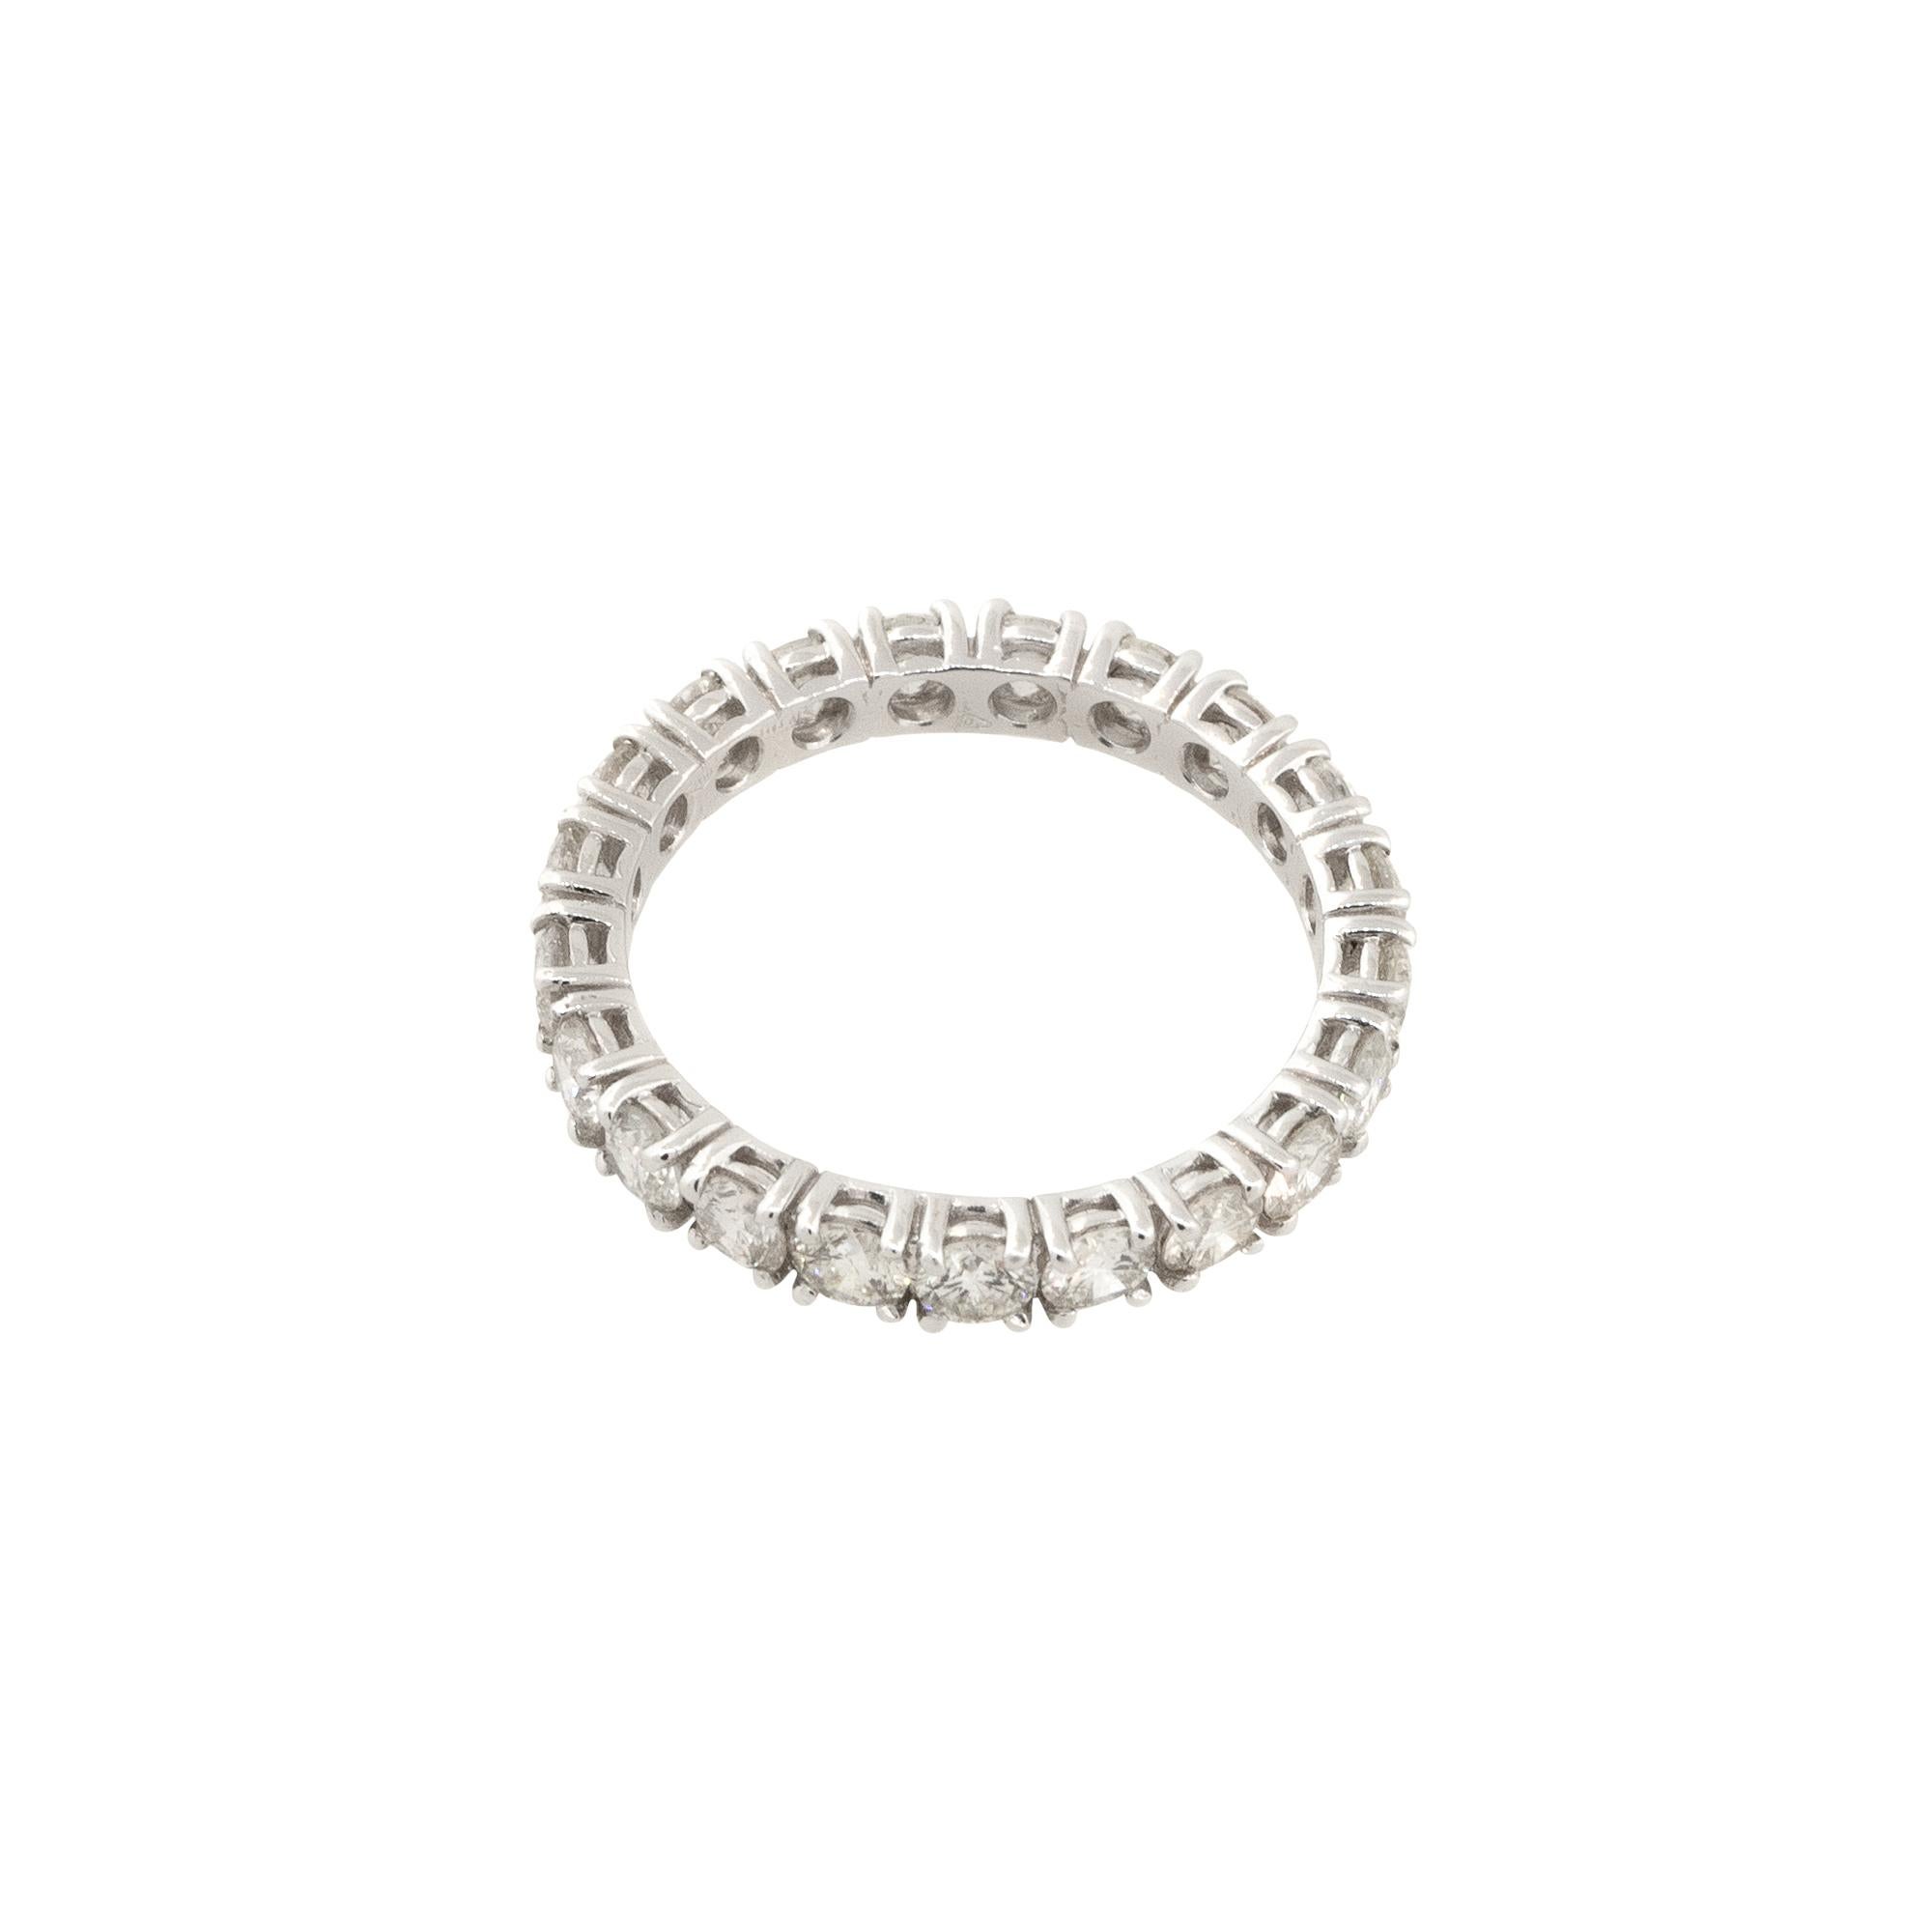 18k White Gold 2.09ctw Round Brilliant Cut Diamond Eternity Band

Style: Women's Diamond Eternity Band
Material: 18k White Gold
Main Diamond Details: Approximately 2.09ctw of Round Brilliant Cut Diamonds. Diamonds are prong set and there are 21